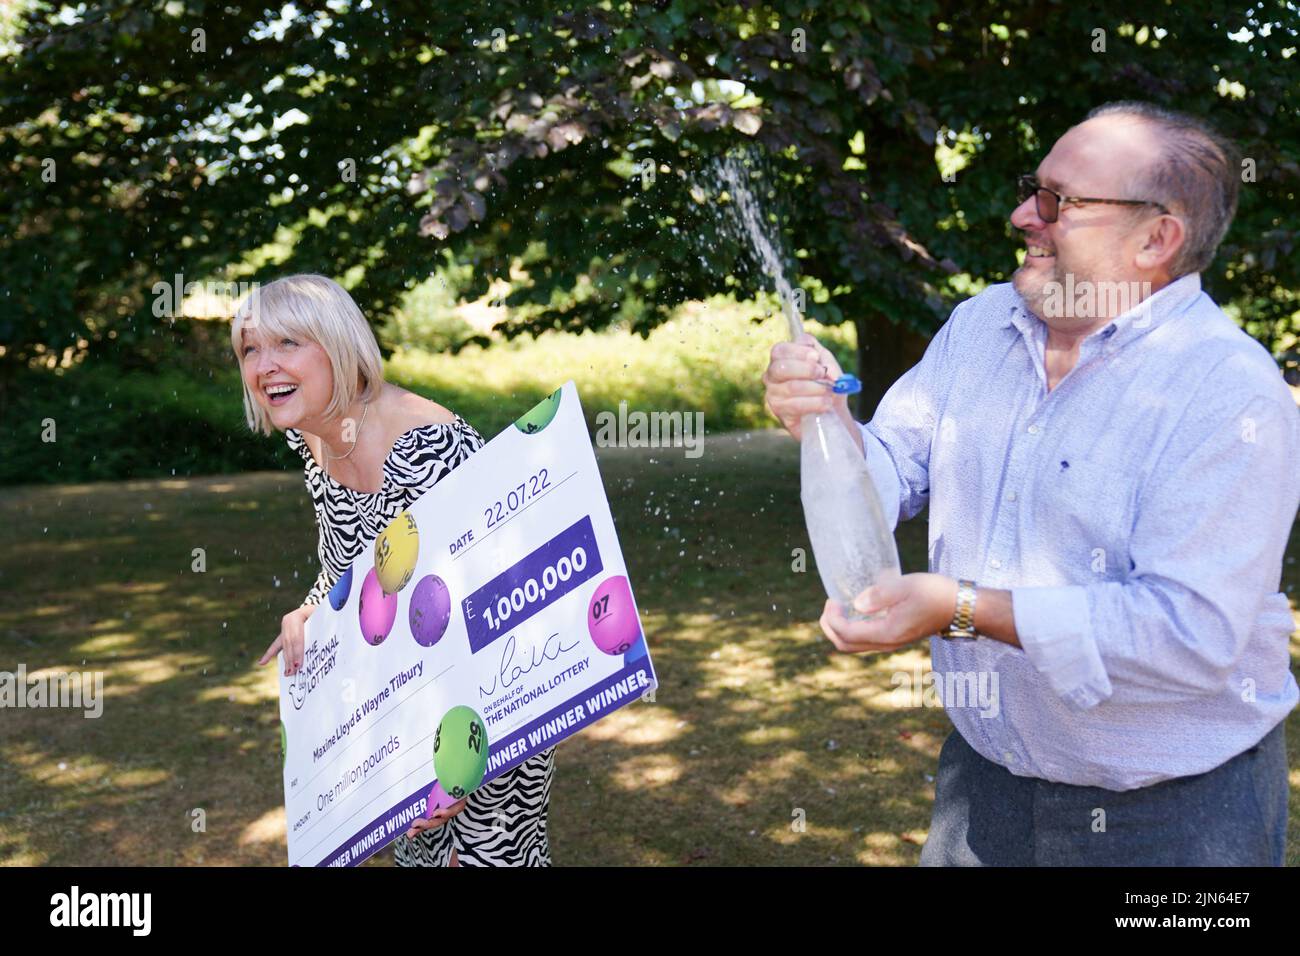 NHS worker Maxine Lloyd and her fiance Wayne Tilbury, from Kettering, celebrate her £1 million win on one of the National Lottery's instant win games at Barton Hall Hotel in Kettering, Northamptonshire, which became a double-celebration when she received the all-clear for breast cancer a few days later. Picture date: Tuesday August 9, 2022. Stock Photo